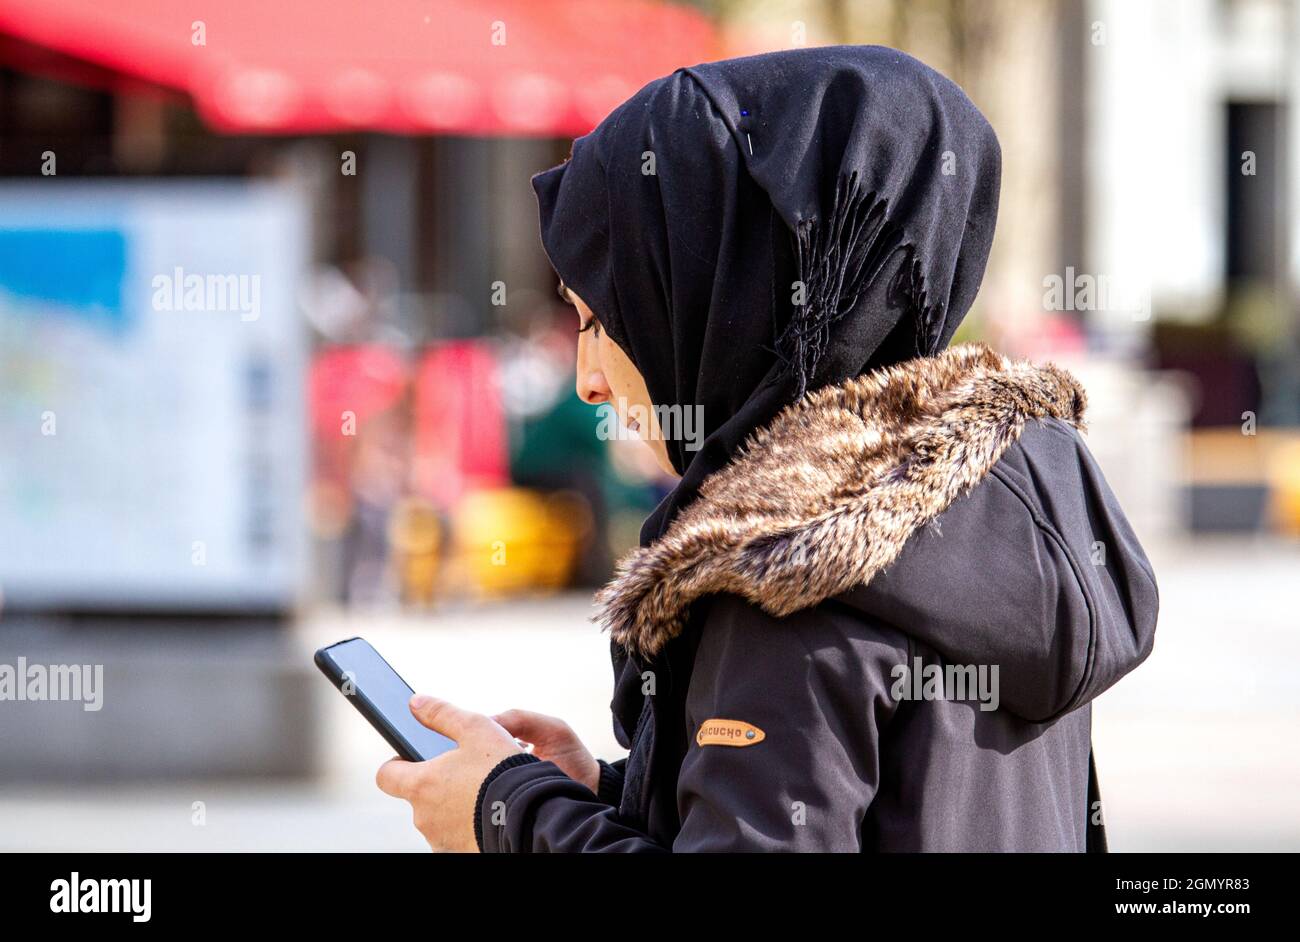 Dundee, Tayside, Scotland, UK. 21st. September 2021. UK weather: A sunny day with a strong cool  breeze across North East Scotland, temperatures reaching 17°C. A Muslim woman spending the day out enjoying the cool sunny weather whilst texting messages on her mobile phone in Dundee city centre. Credit: Dundee Photographics/Alamy Live News Stock Photo